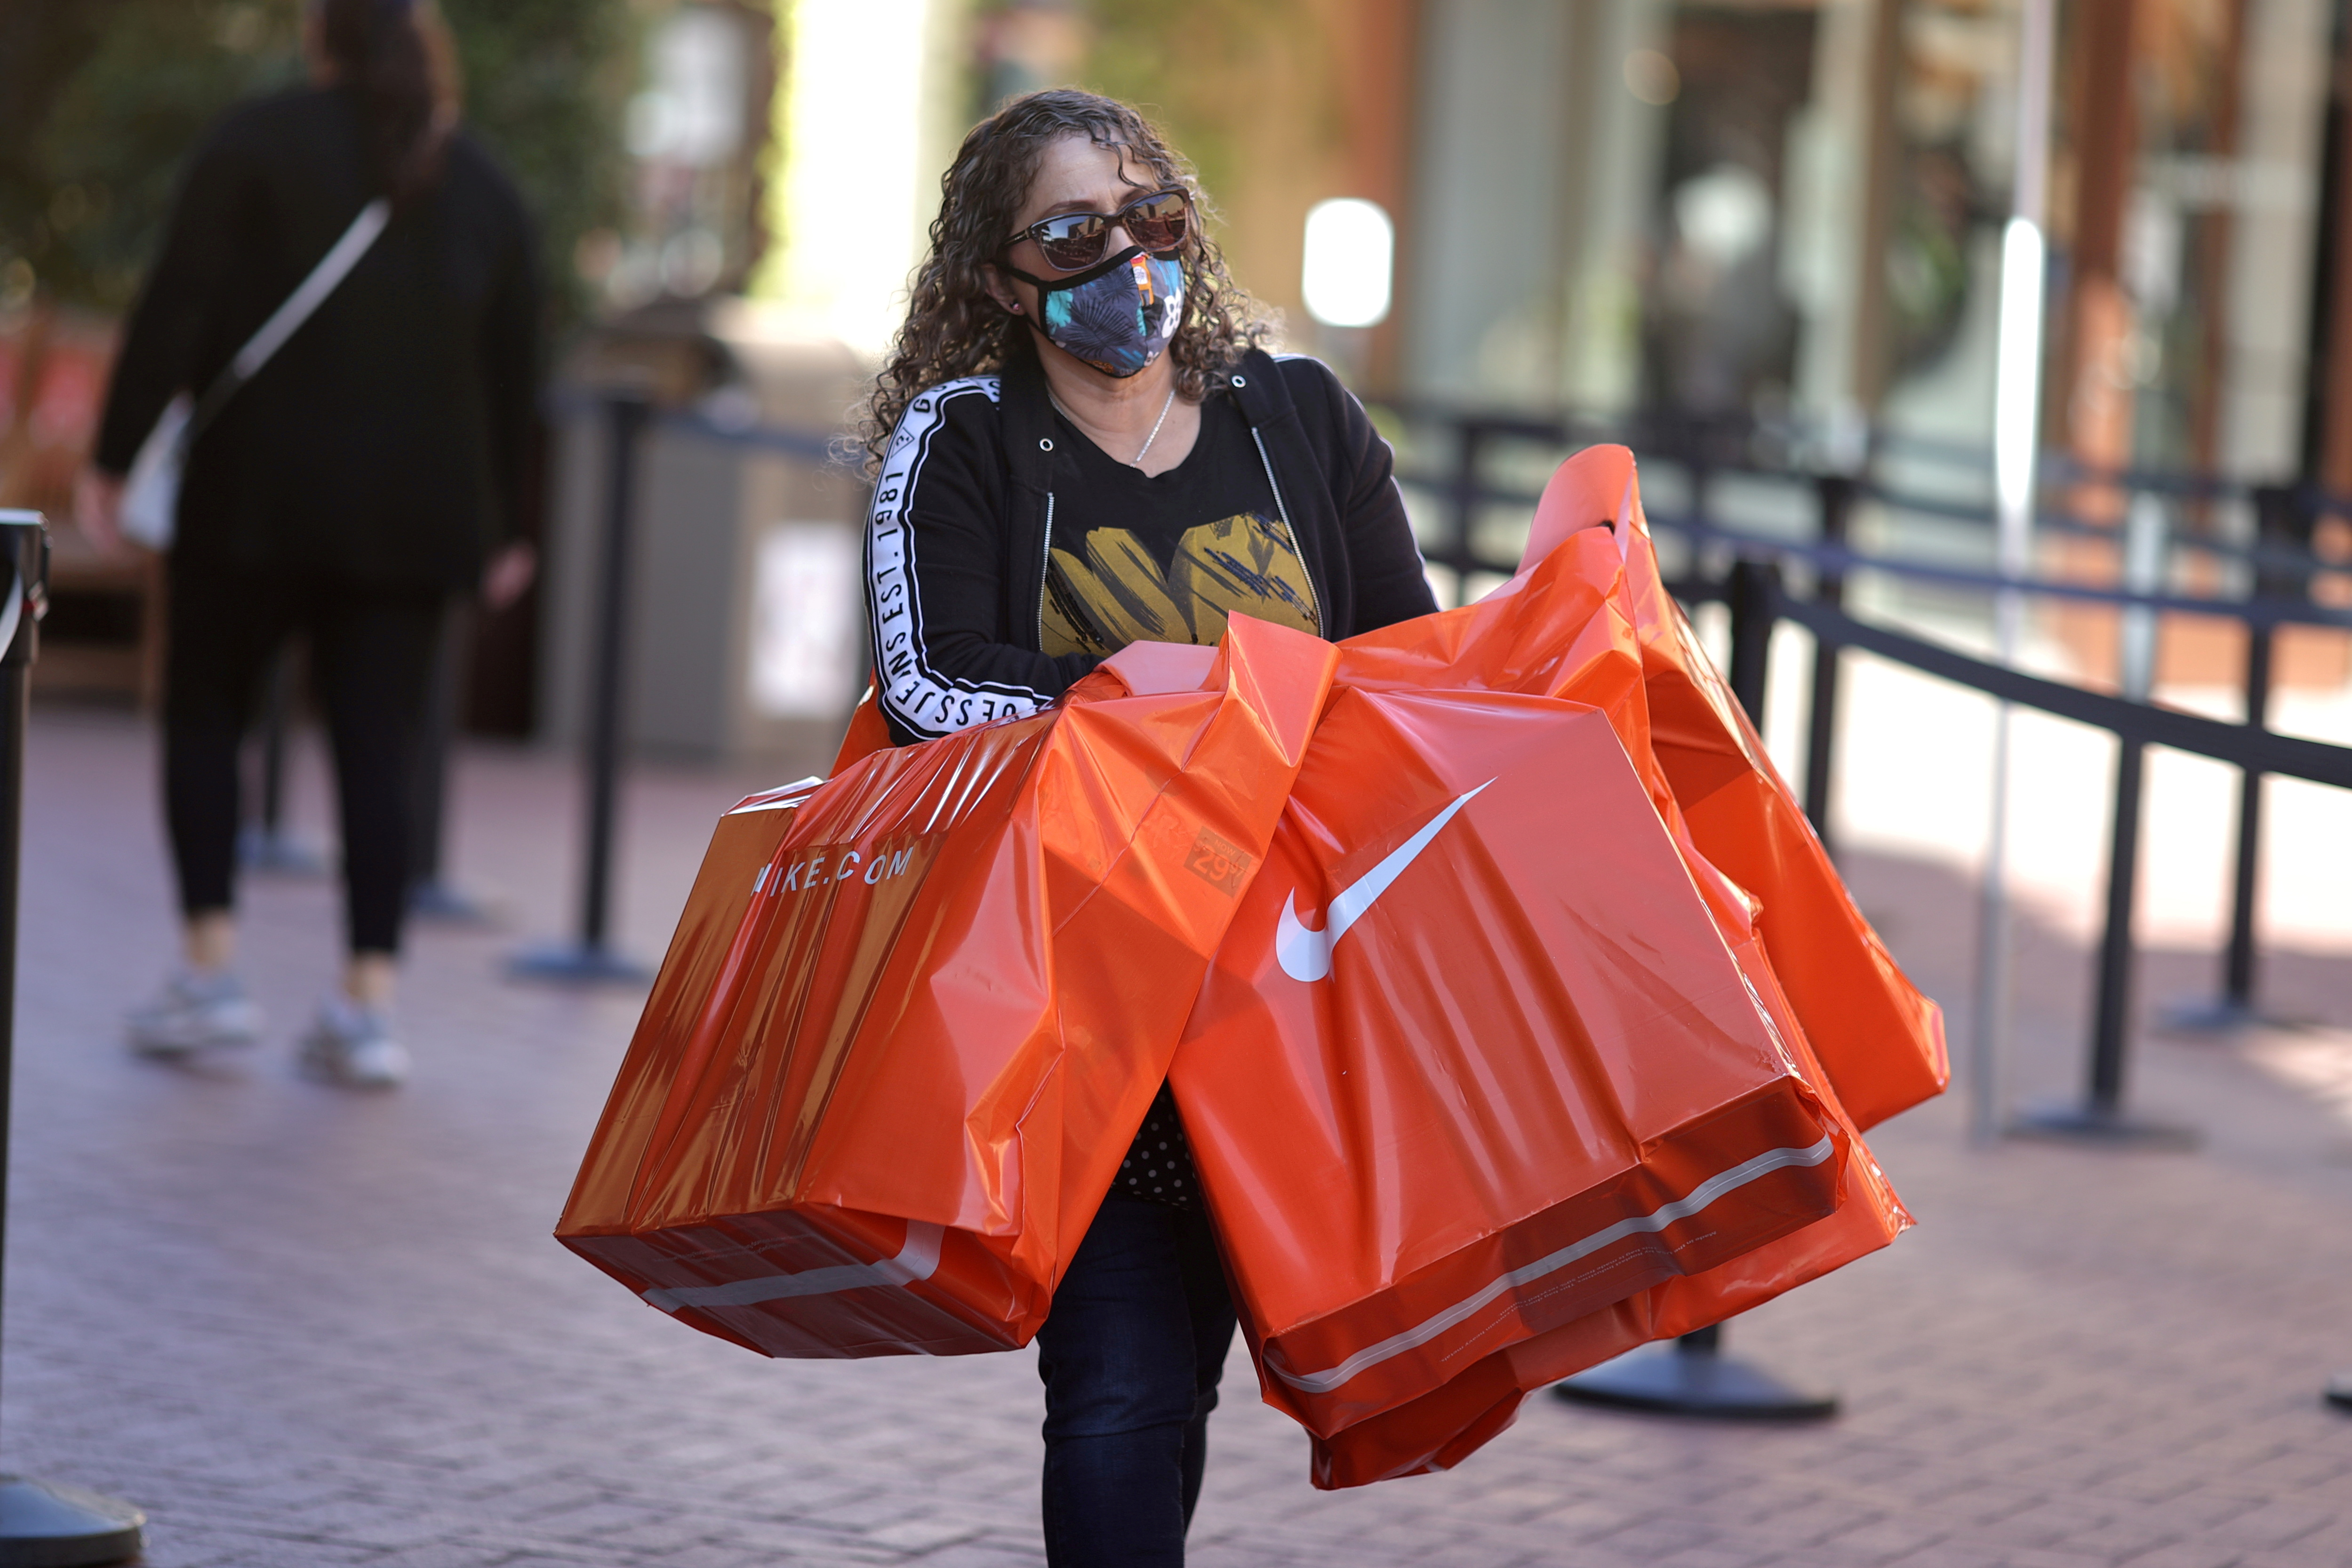 A woman carries Nike shopping bags at the Citadel Outlet mall, as the global outbreak of the coronavirus disease (COVID-19) continues, in Commerce, California, U.S., December 3, 2020. REUTERS/Lucy Nicholson/File Photo/File Photo